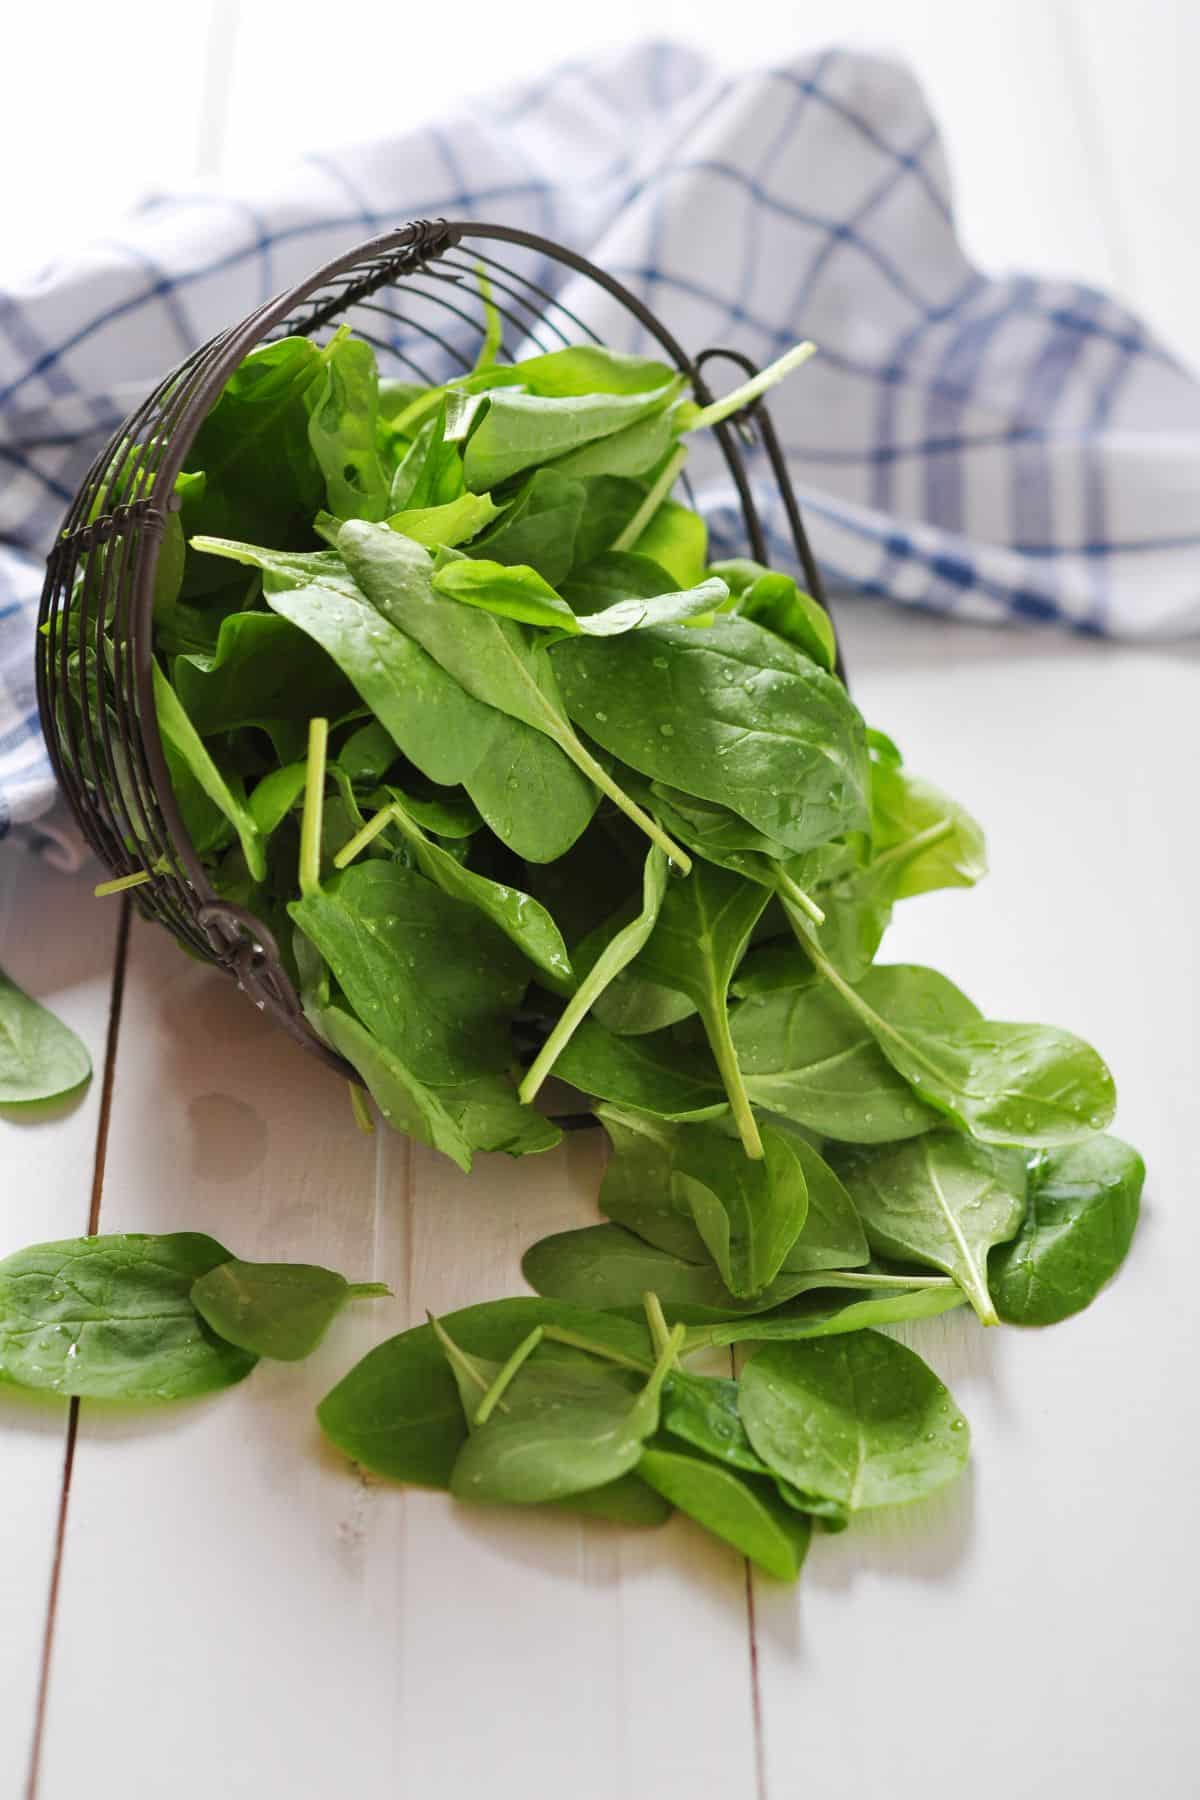 Basket of baby spinach leaves spilling onto wooden surface.